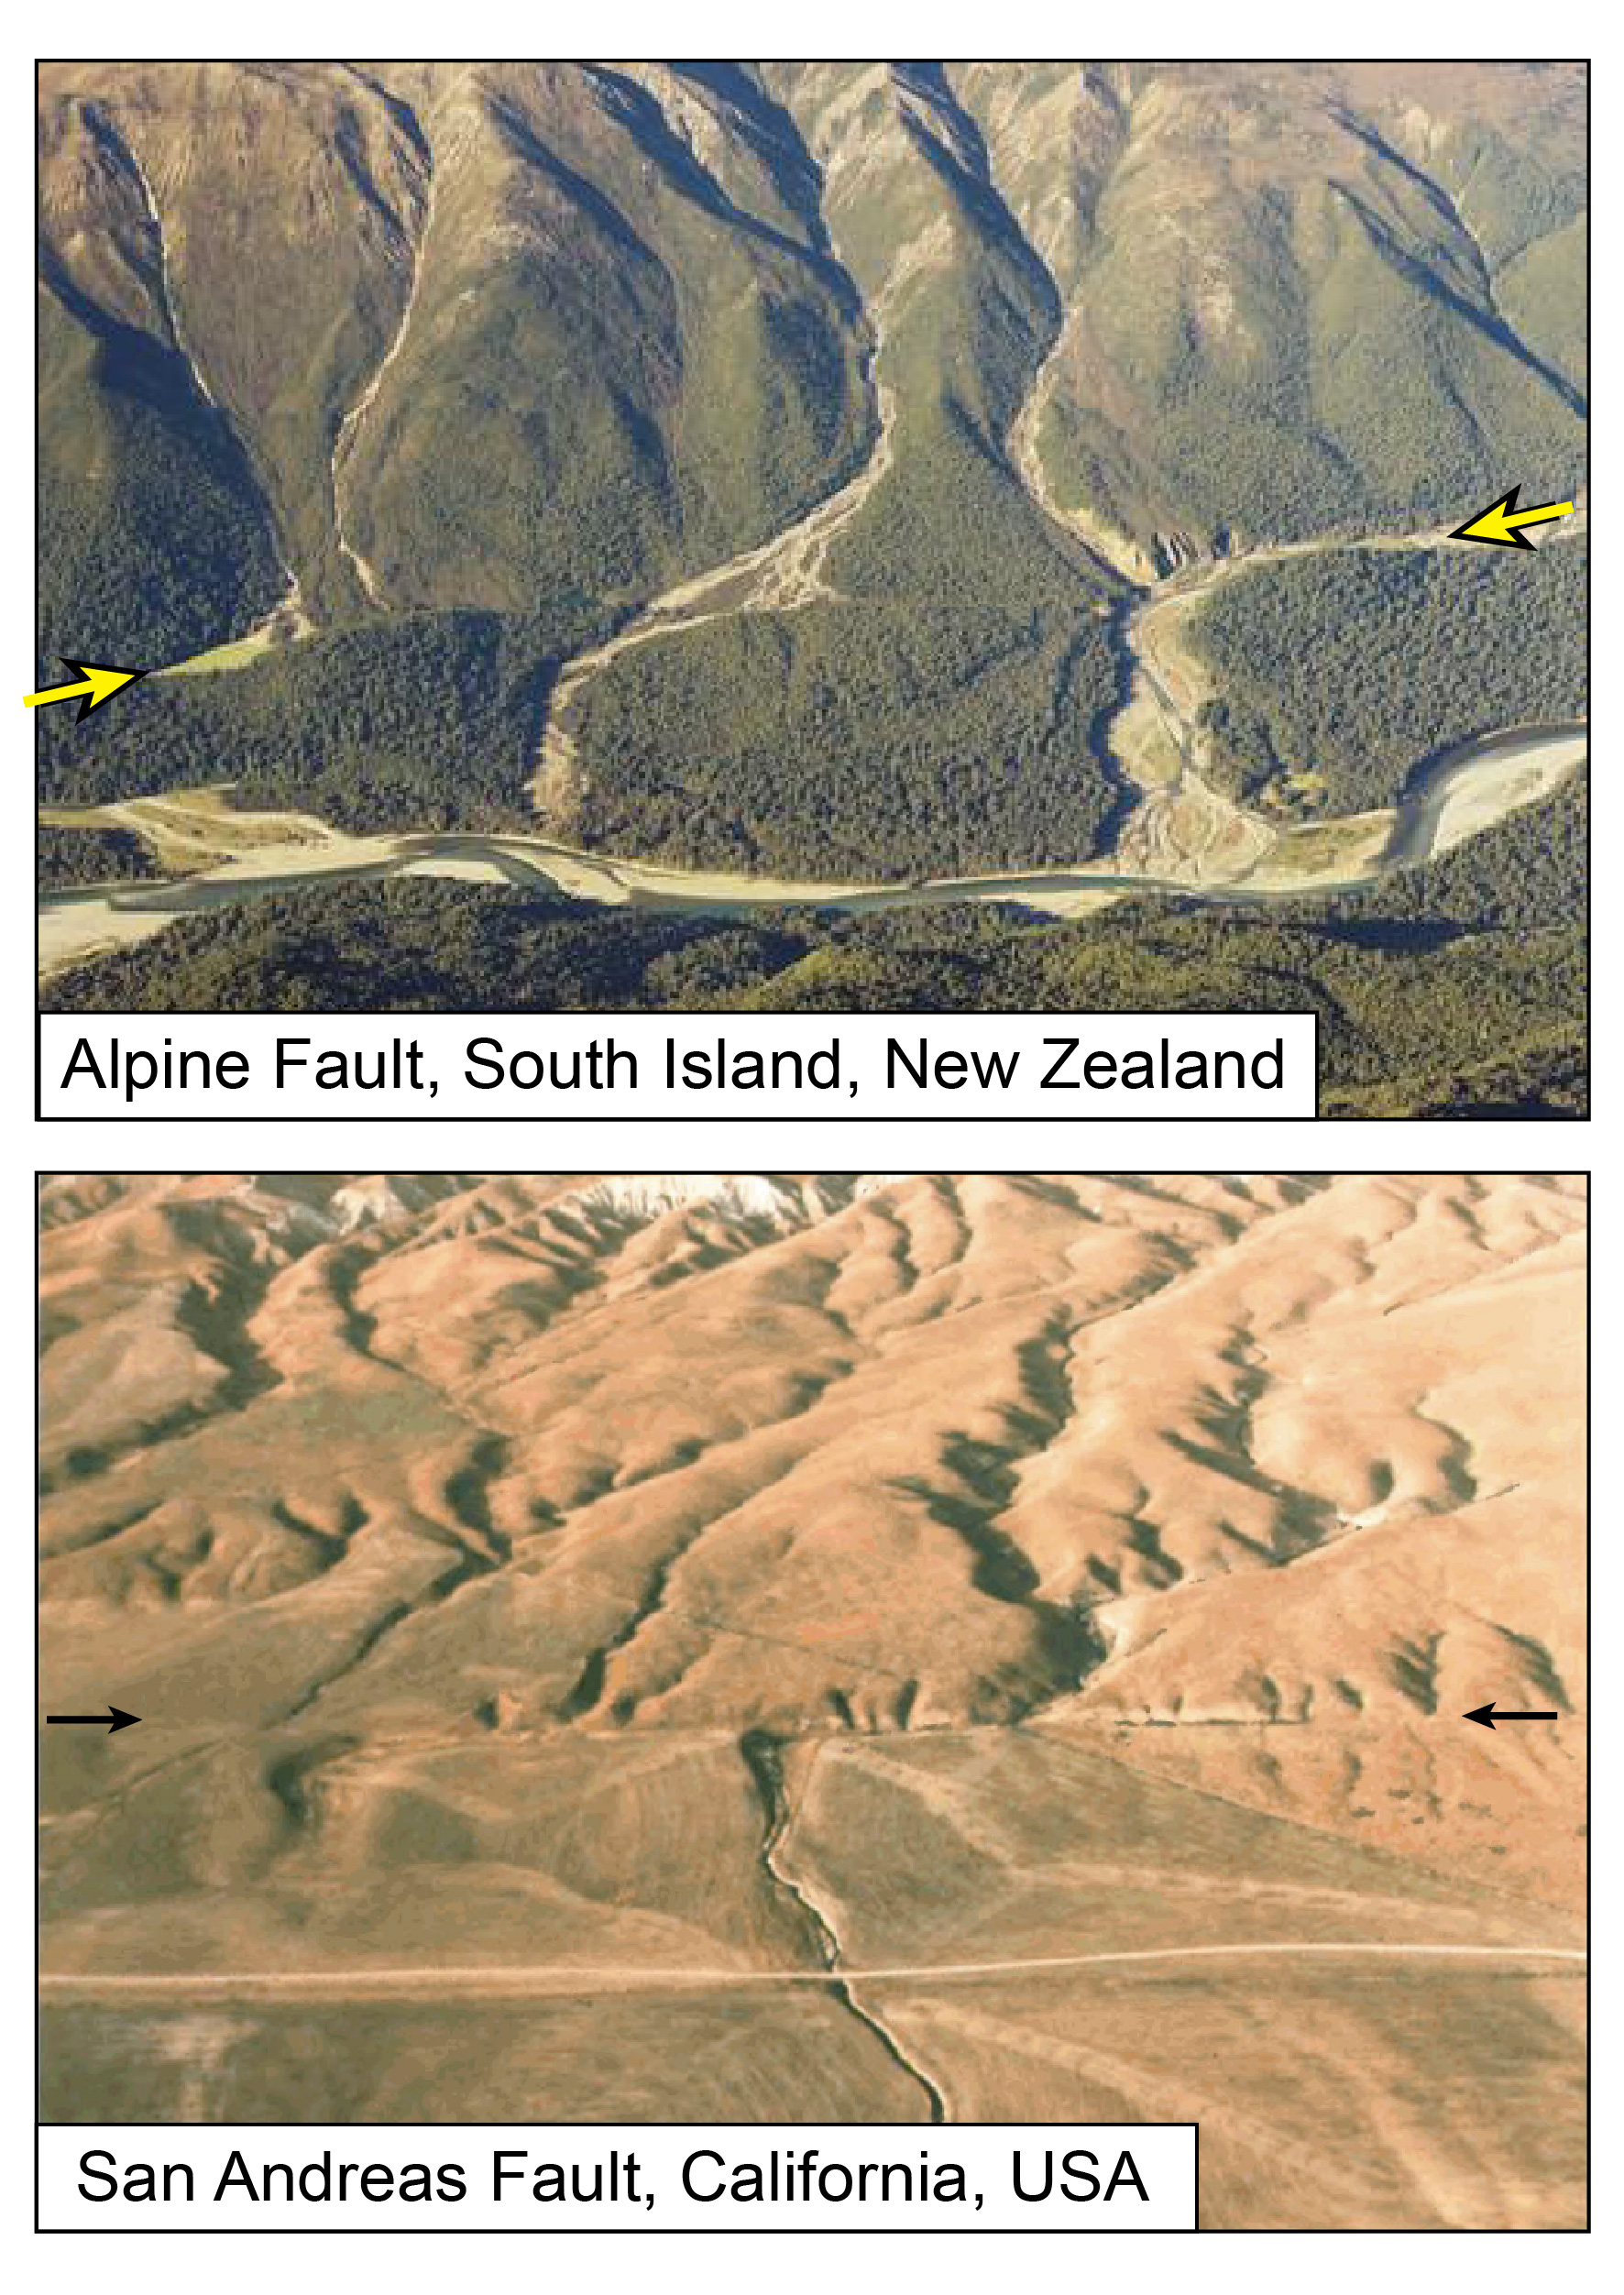 Two of the world’s major strike-slip faults, the Alpine Fault in New Zealand and the San Andreas Fault in the US, are capable of producing large (≈ M 8.0) earthquakes on land. Both fault lines are indicated by the arrows, where fault movements caused the rivers to bend. (Source: GNS and Wikipedia)